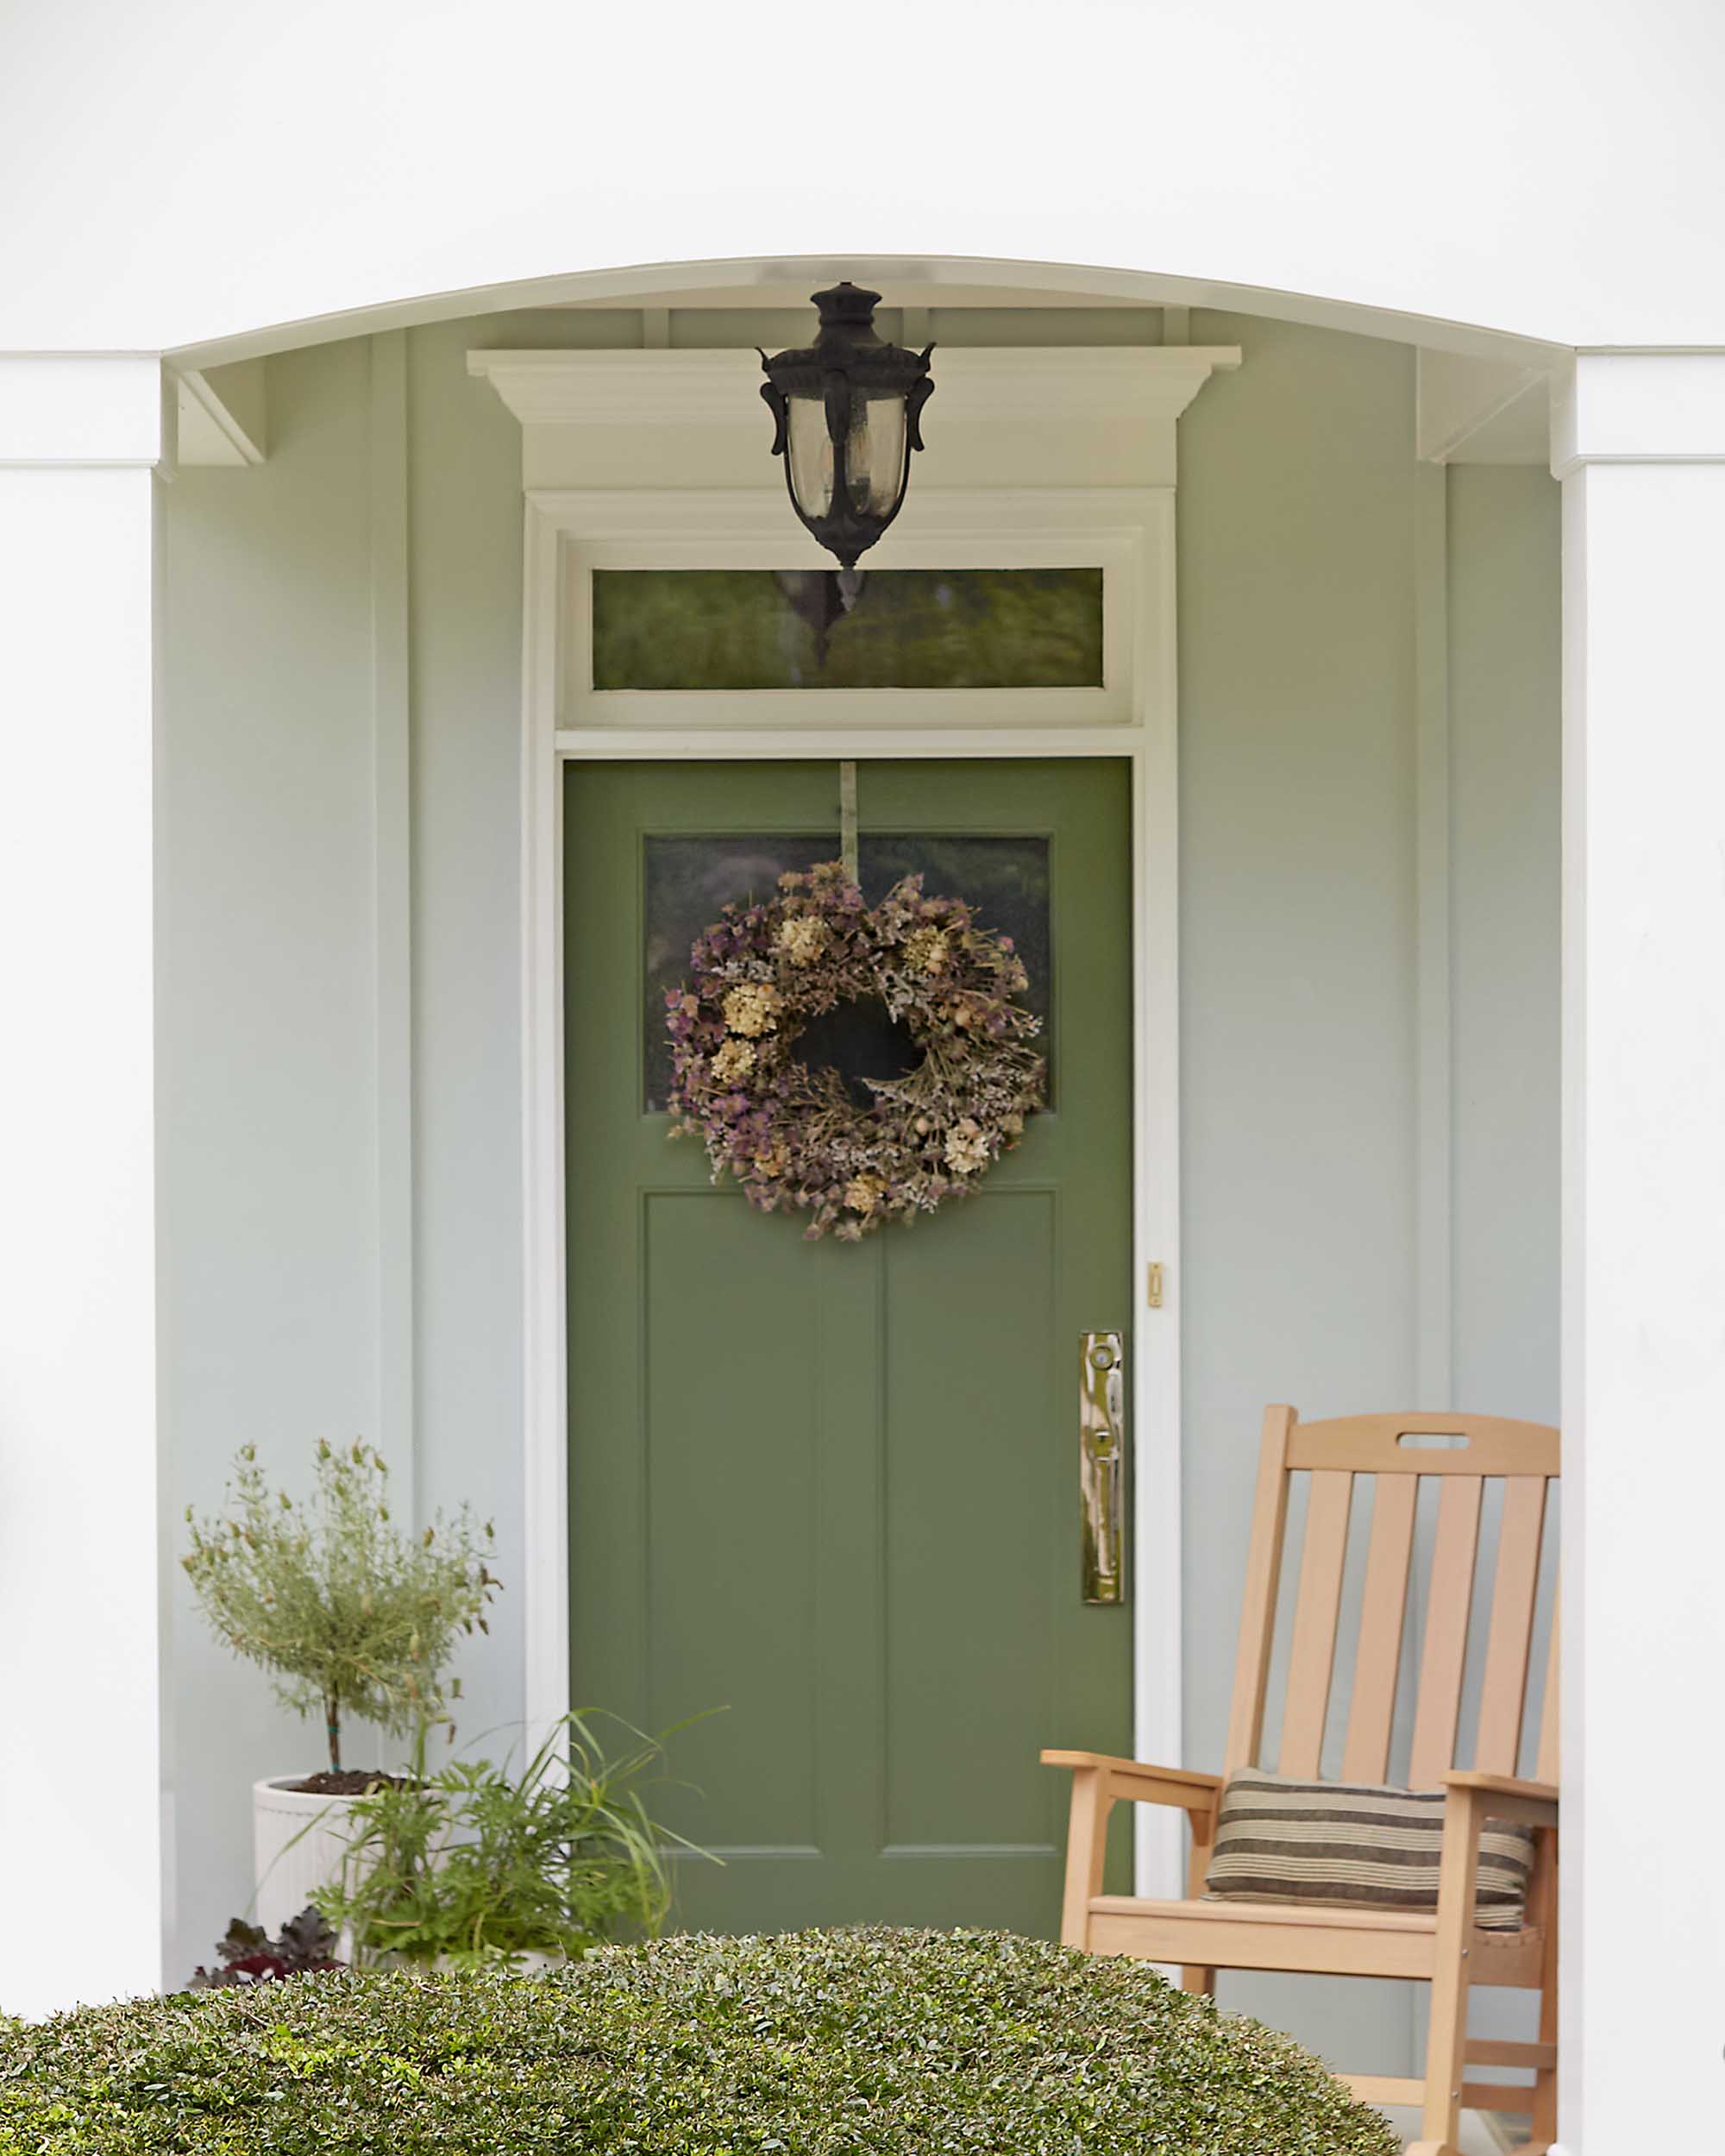 Looking for front door paint colors? Checkout this front door painted in Clare’s Daily Greens Exterior Paint, it’s the perfect neutral for outdoor spaces. 